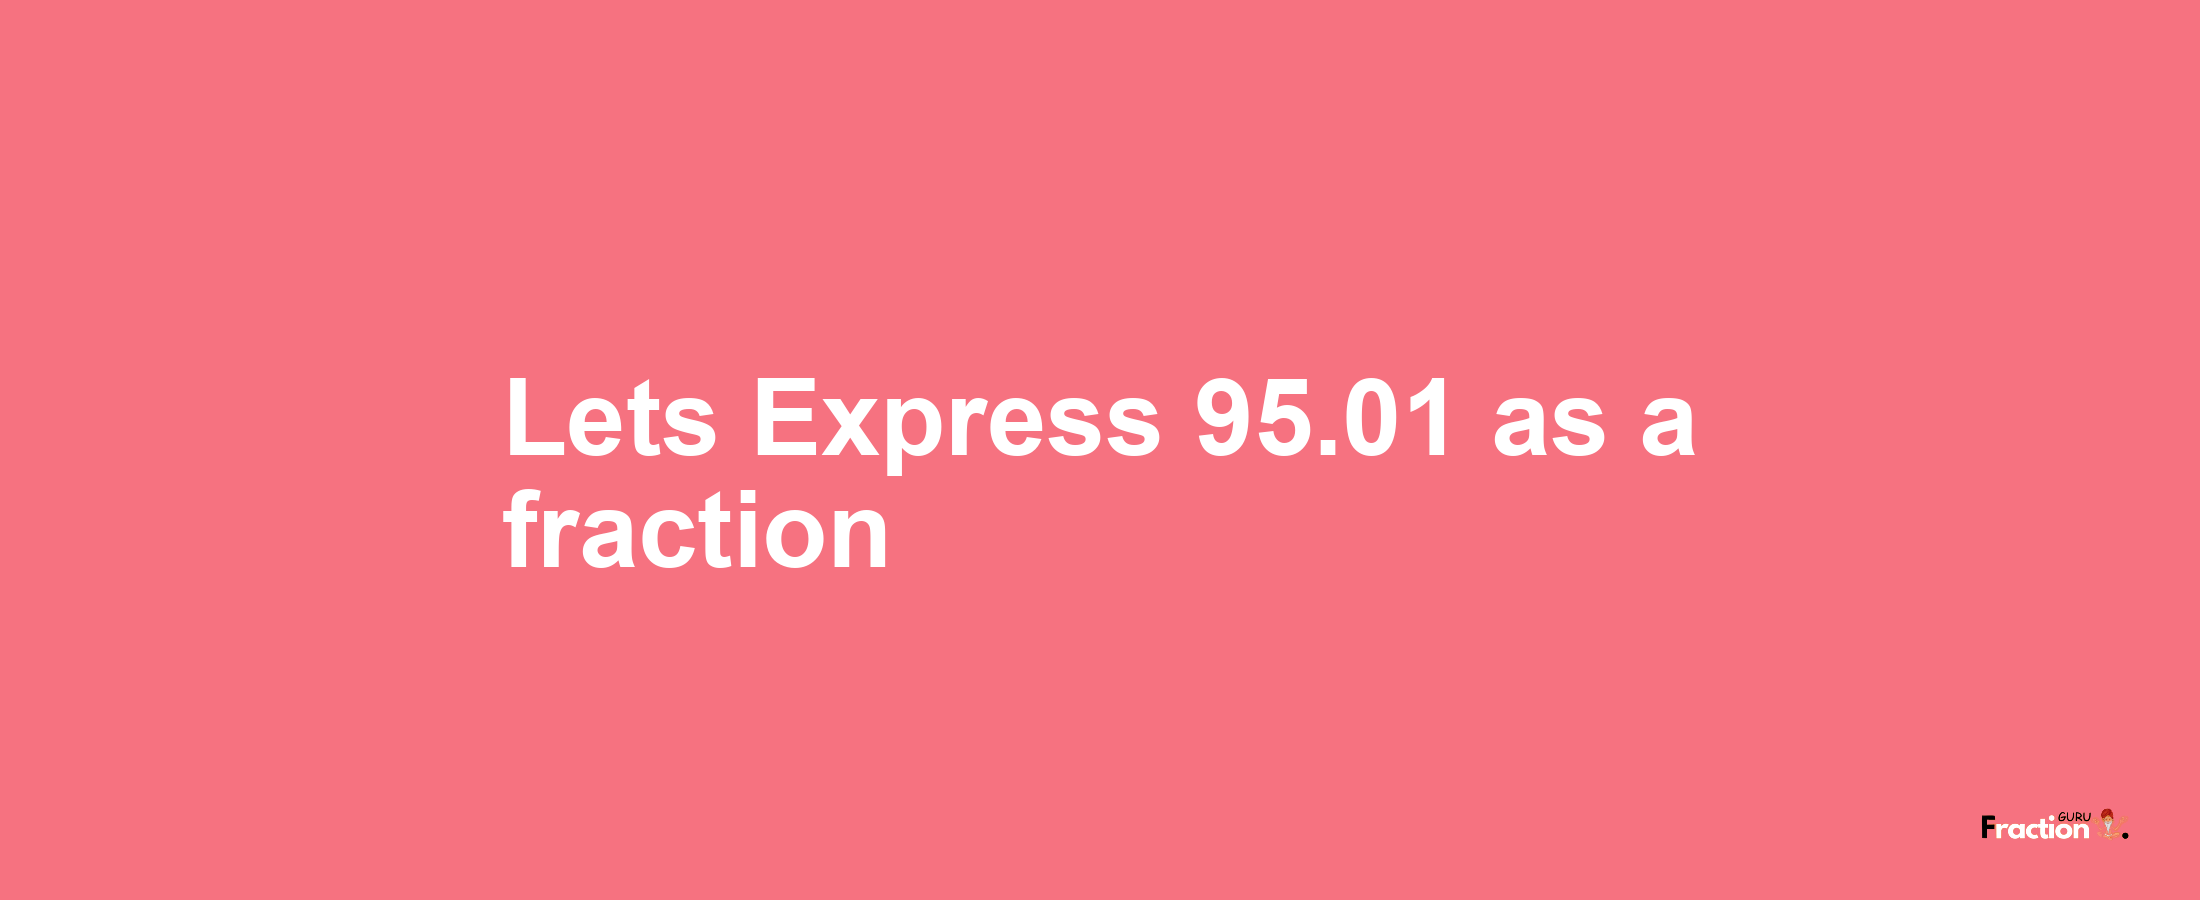 Lets Express 95.01 as afraction